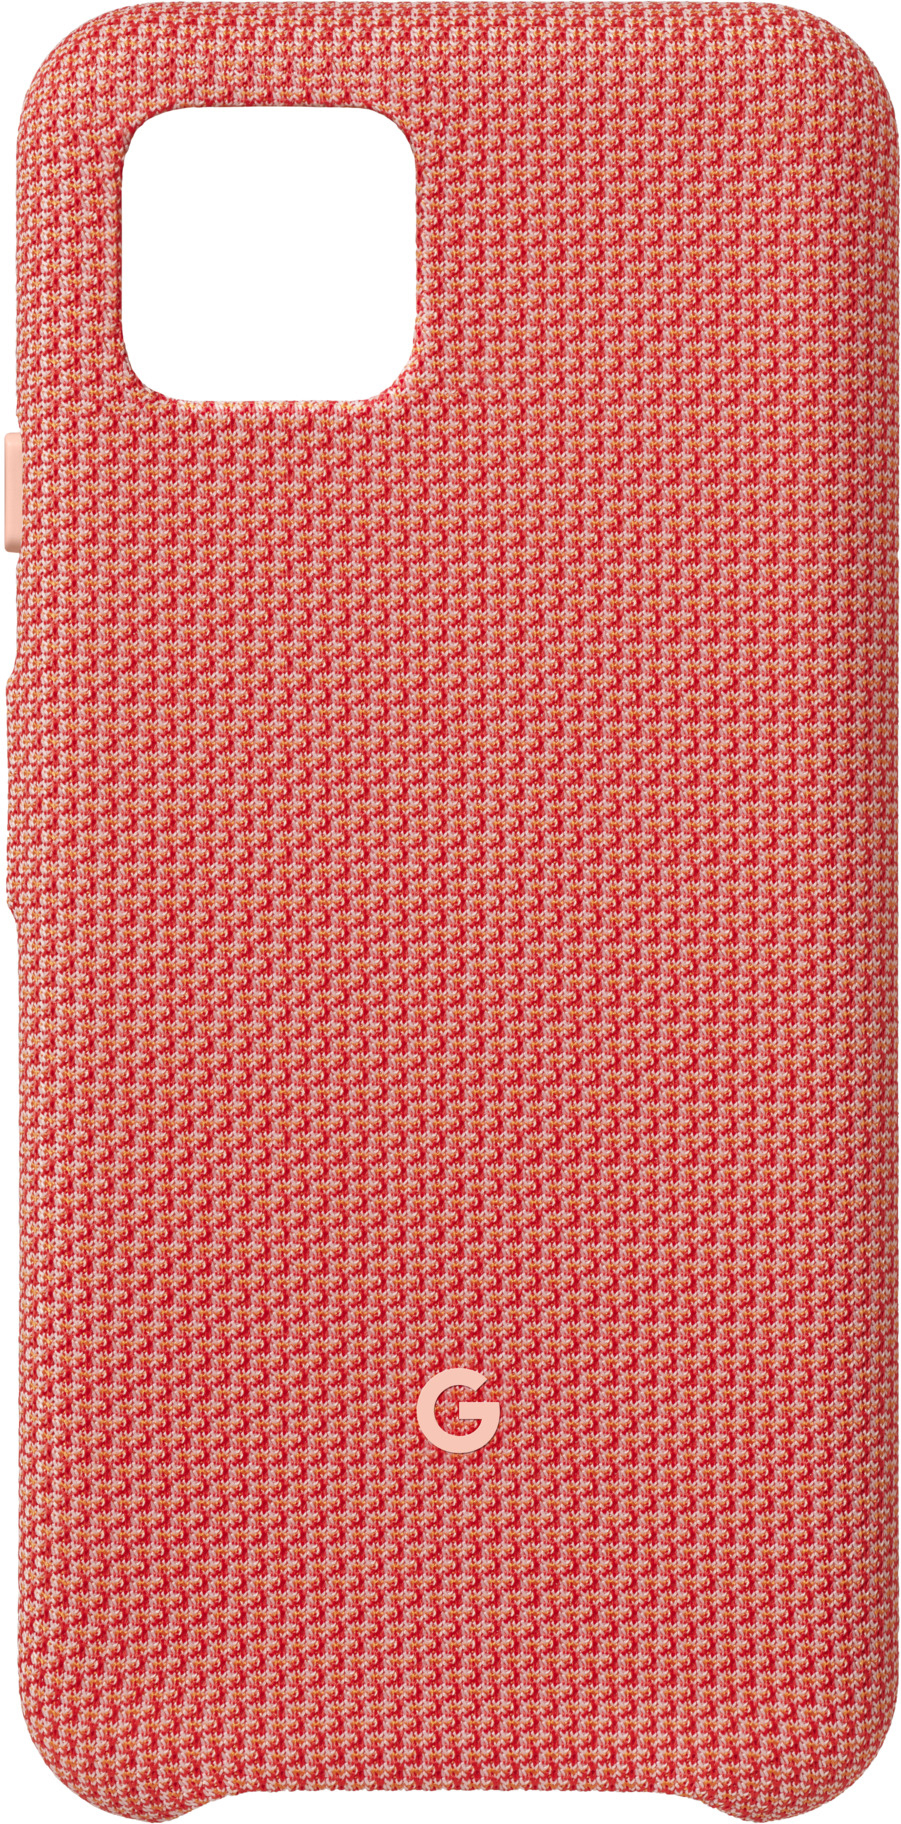 Pixel GA01282, be GOOGLE Google, Coral Could 4, Backcover,